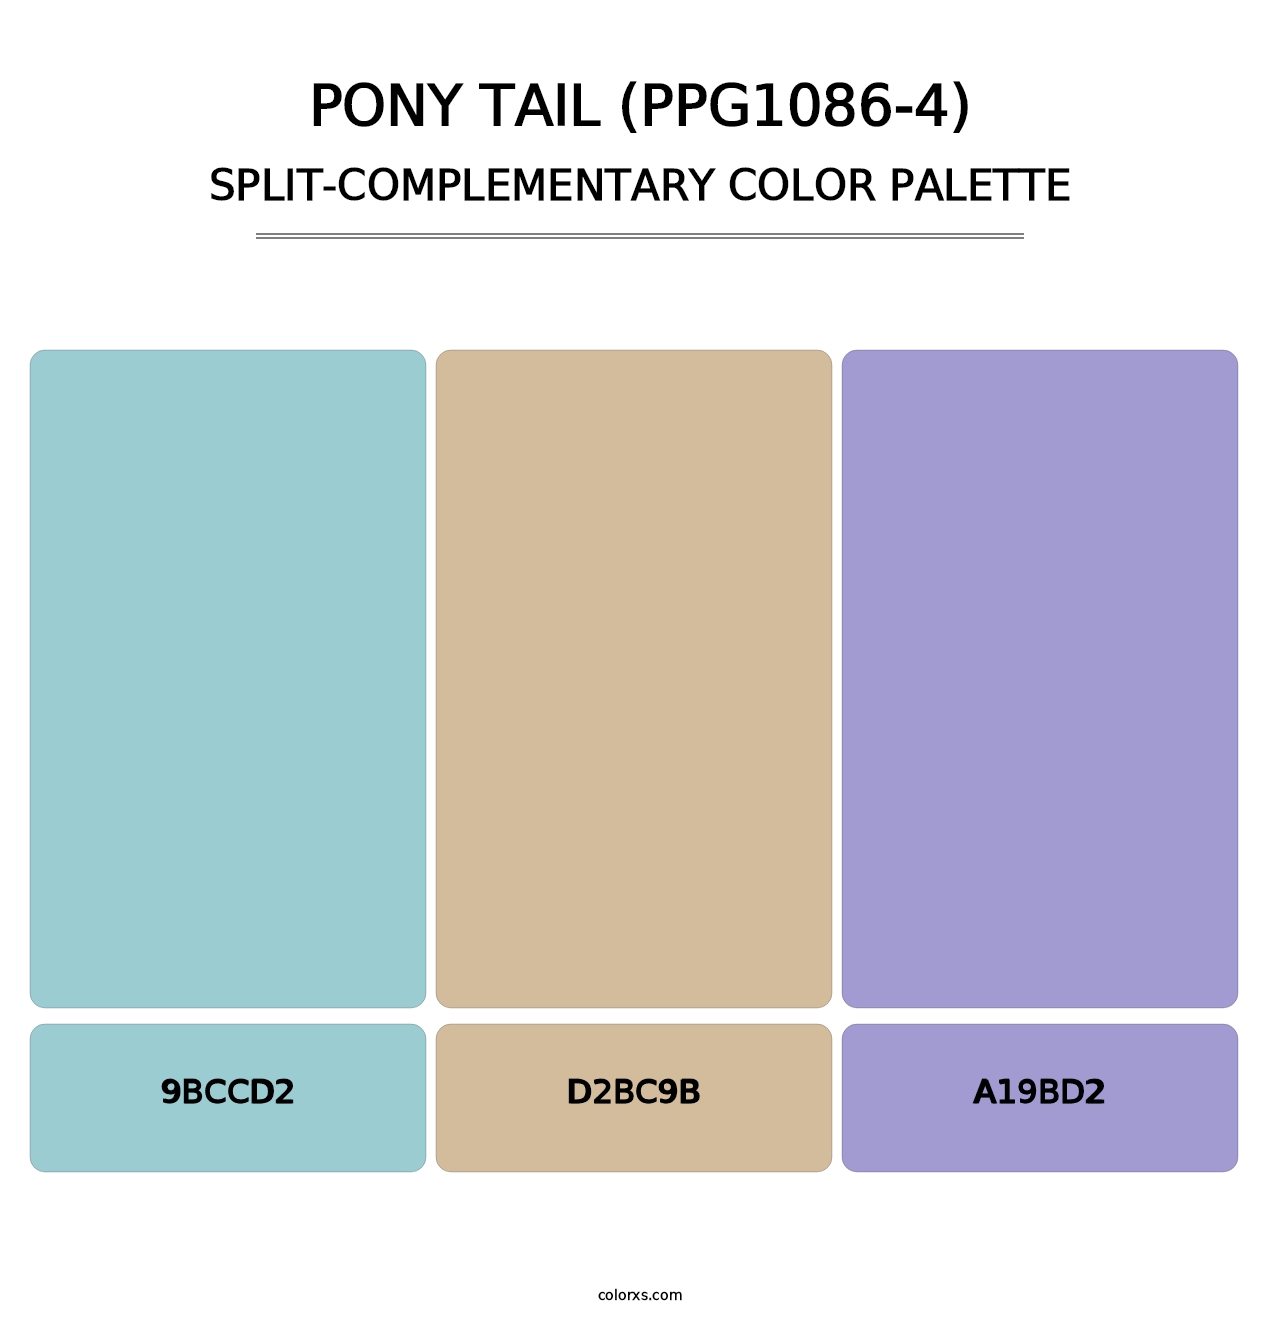 Pony Tail (PPG1086-4) - Split-Complementary Color Palette